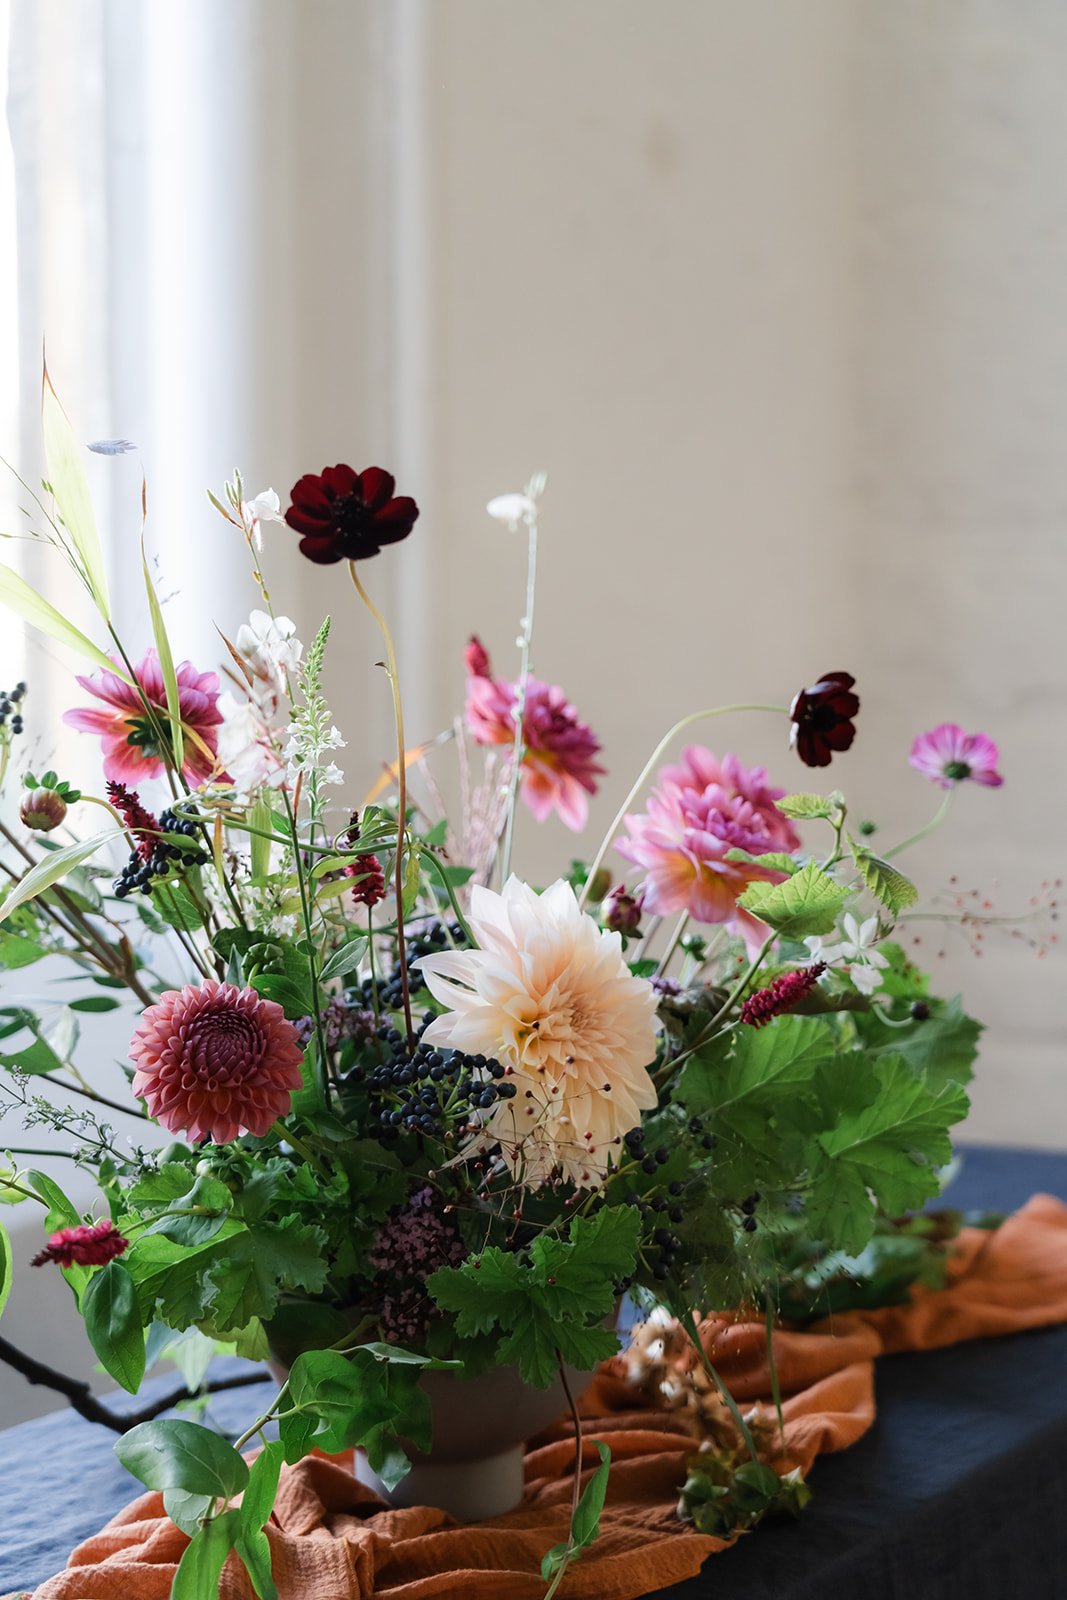 Garden inspired table centre with pink and deep burgundy flowers